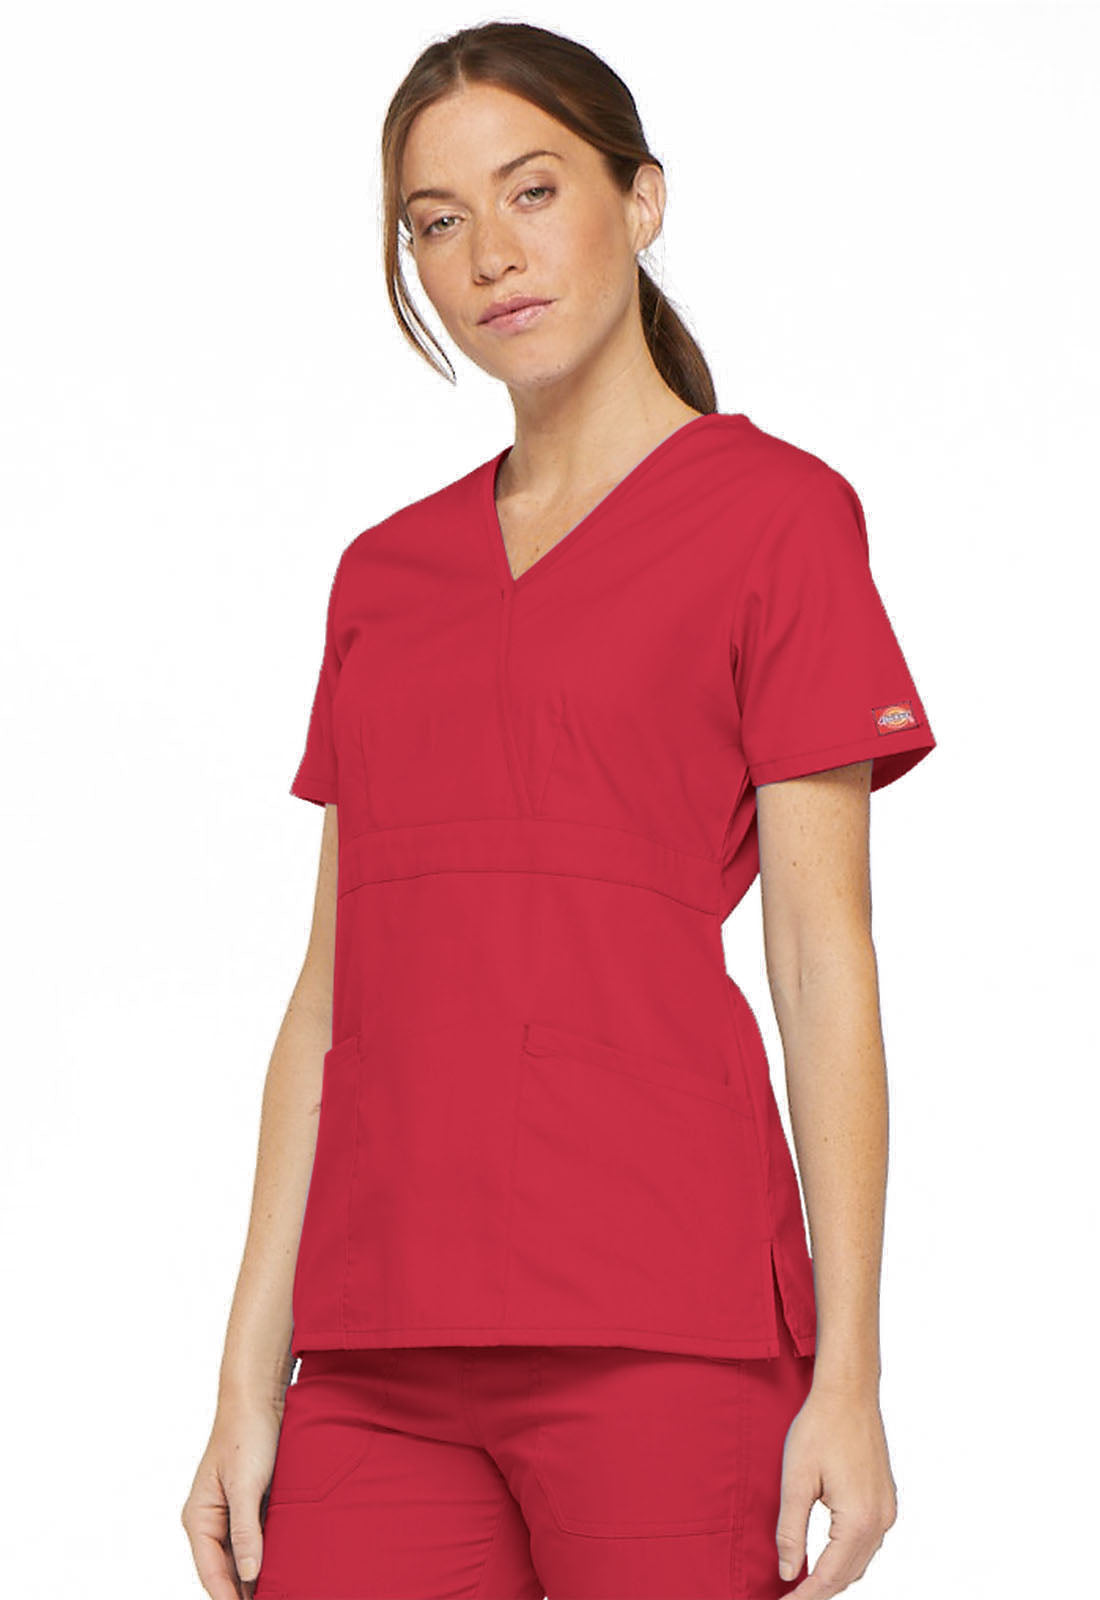 Exist. Conjunto Mujer Dickies EDS Signature Mod.86806/86106 Red